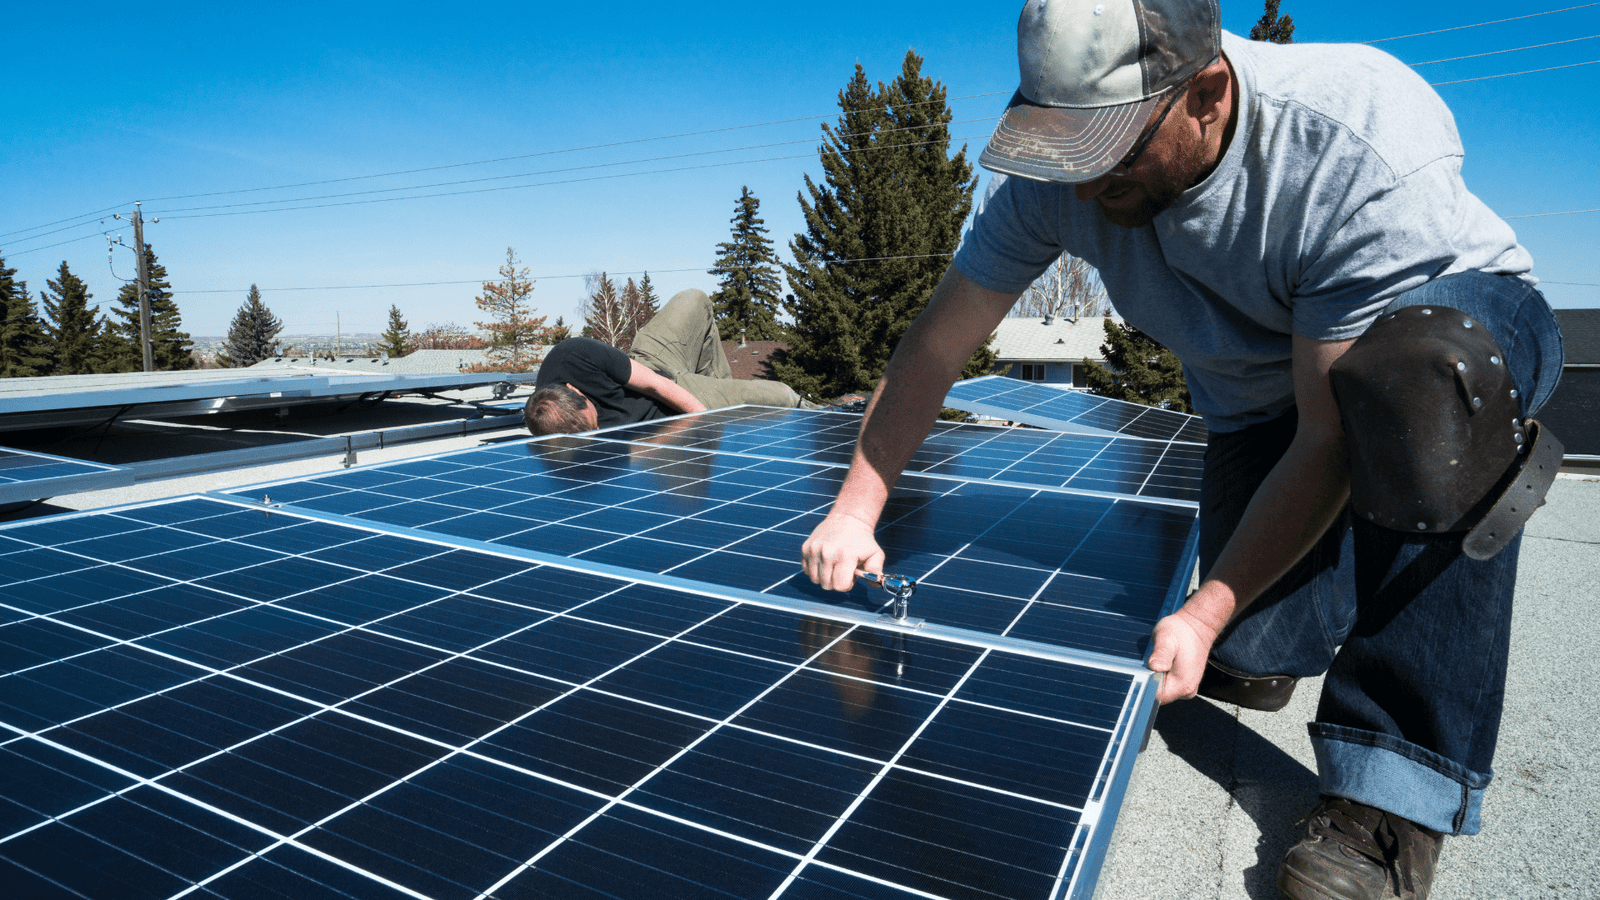 The Process of Installing Solar Panels on a Flat Roof